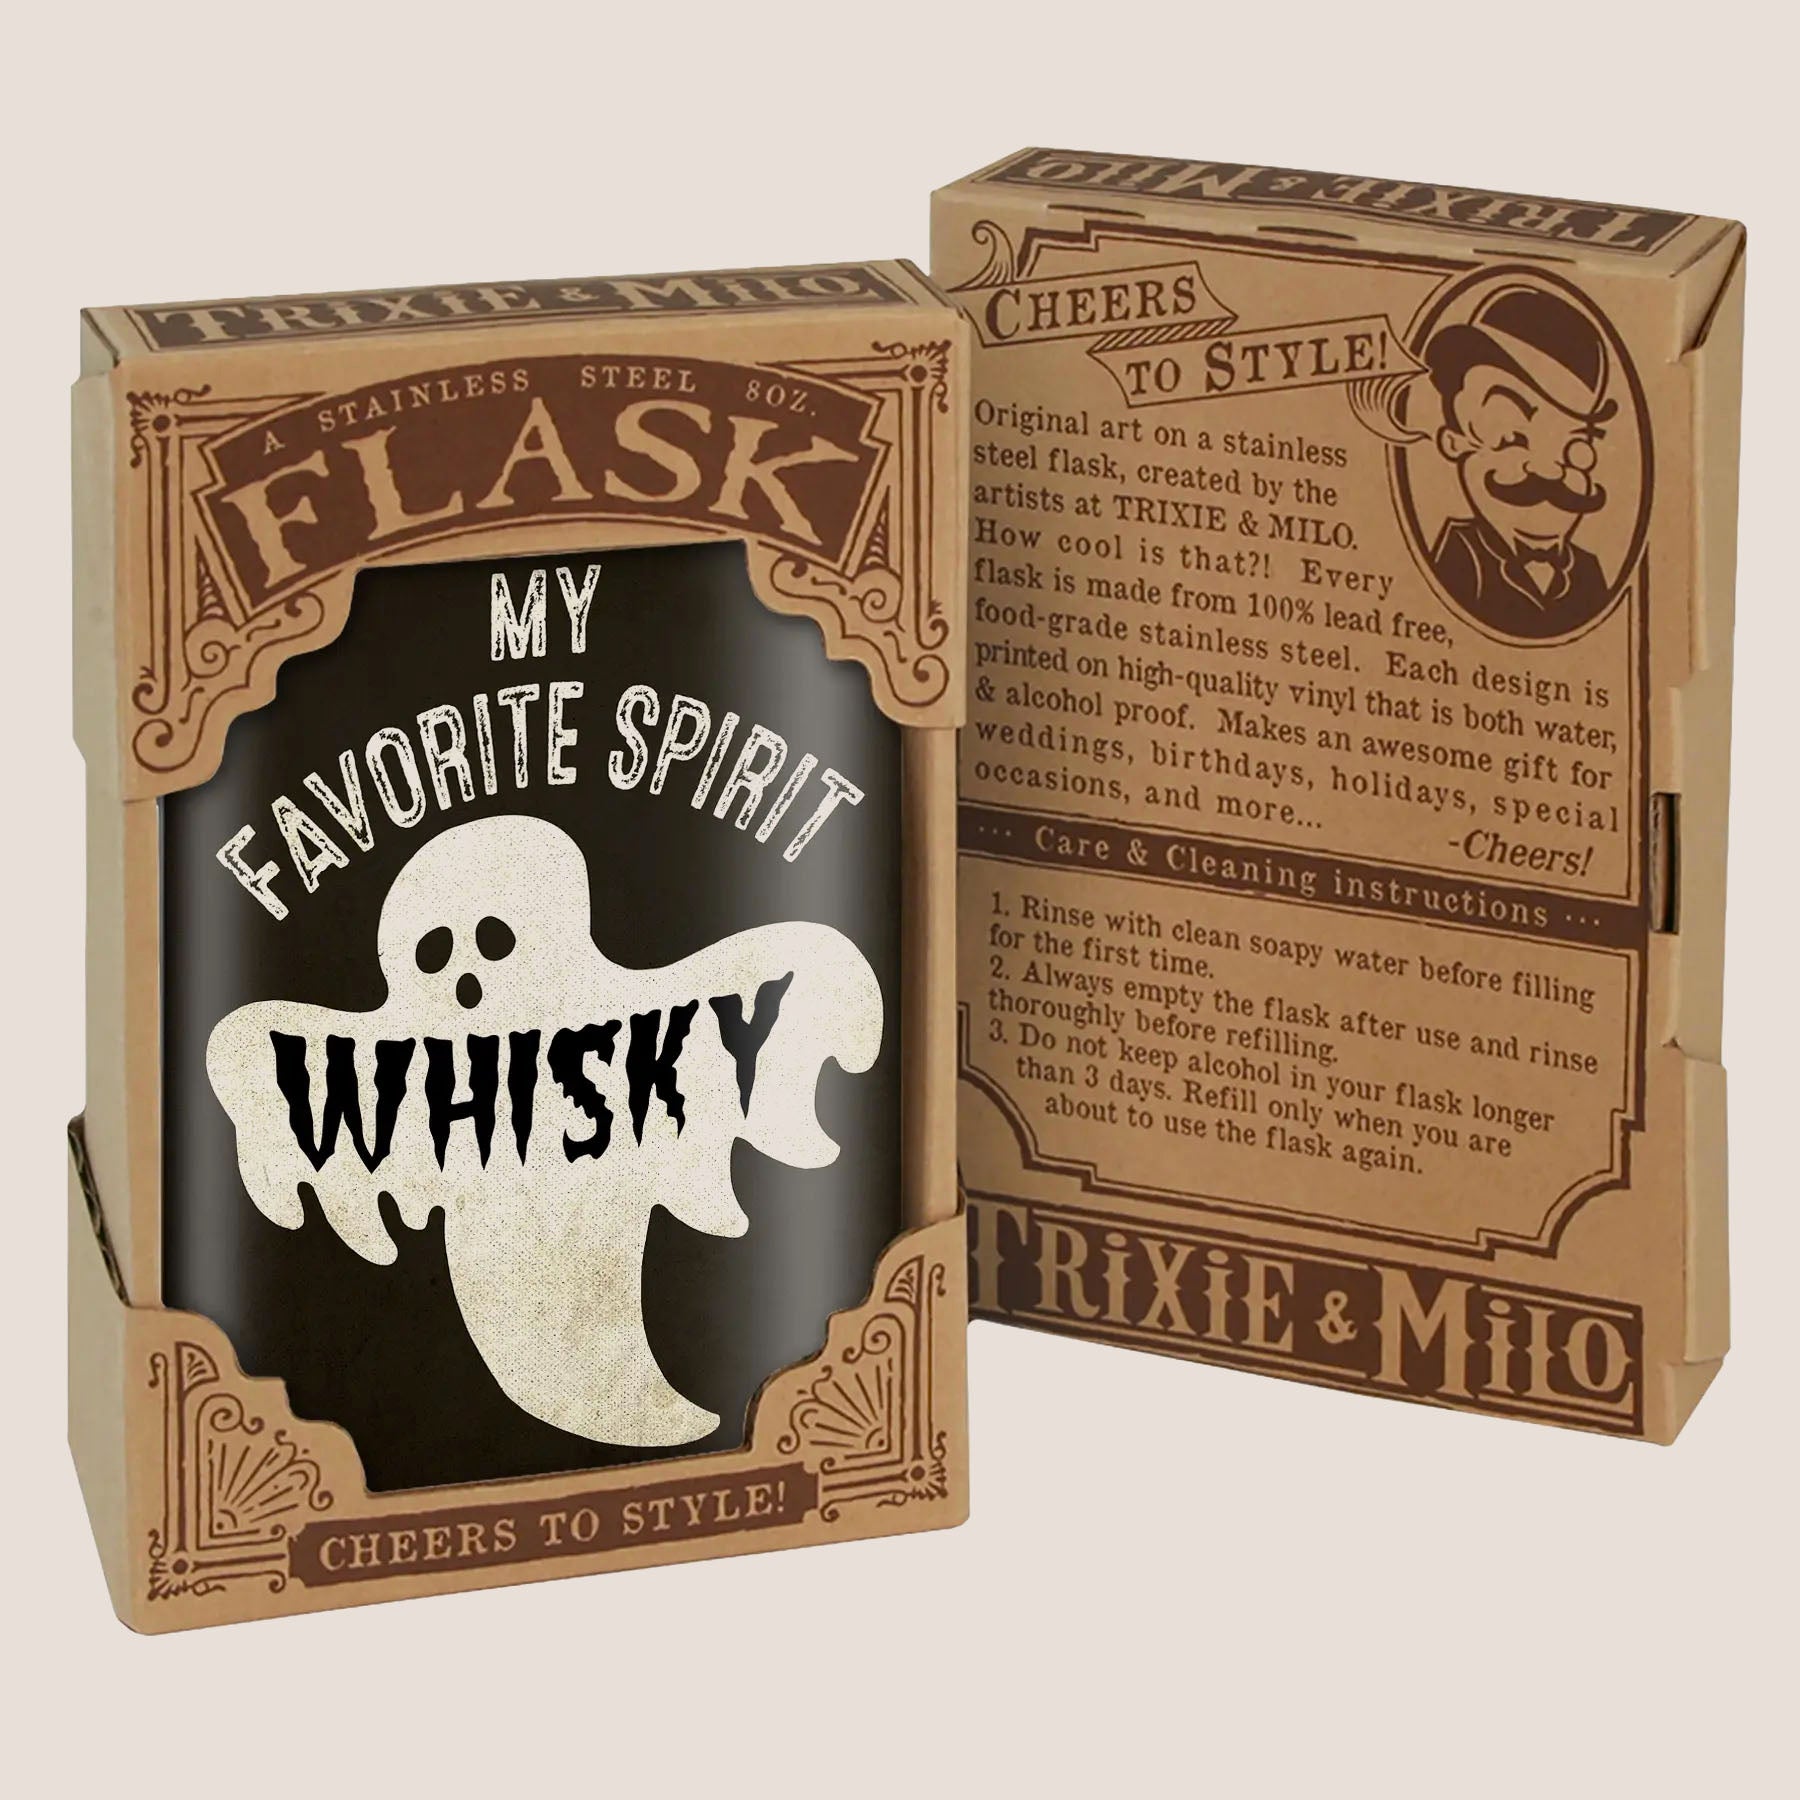 8 oz. Hip Flask: My Favorite Spirit is Whisky Kick off every Halloween or spooky party with confidence. Cool stylish stainless steel drinking flask. Designed for durability and aesthetic appeal in gift box